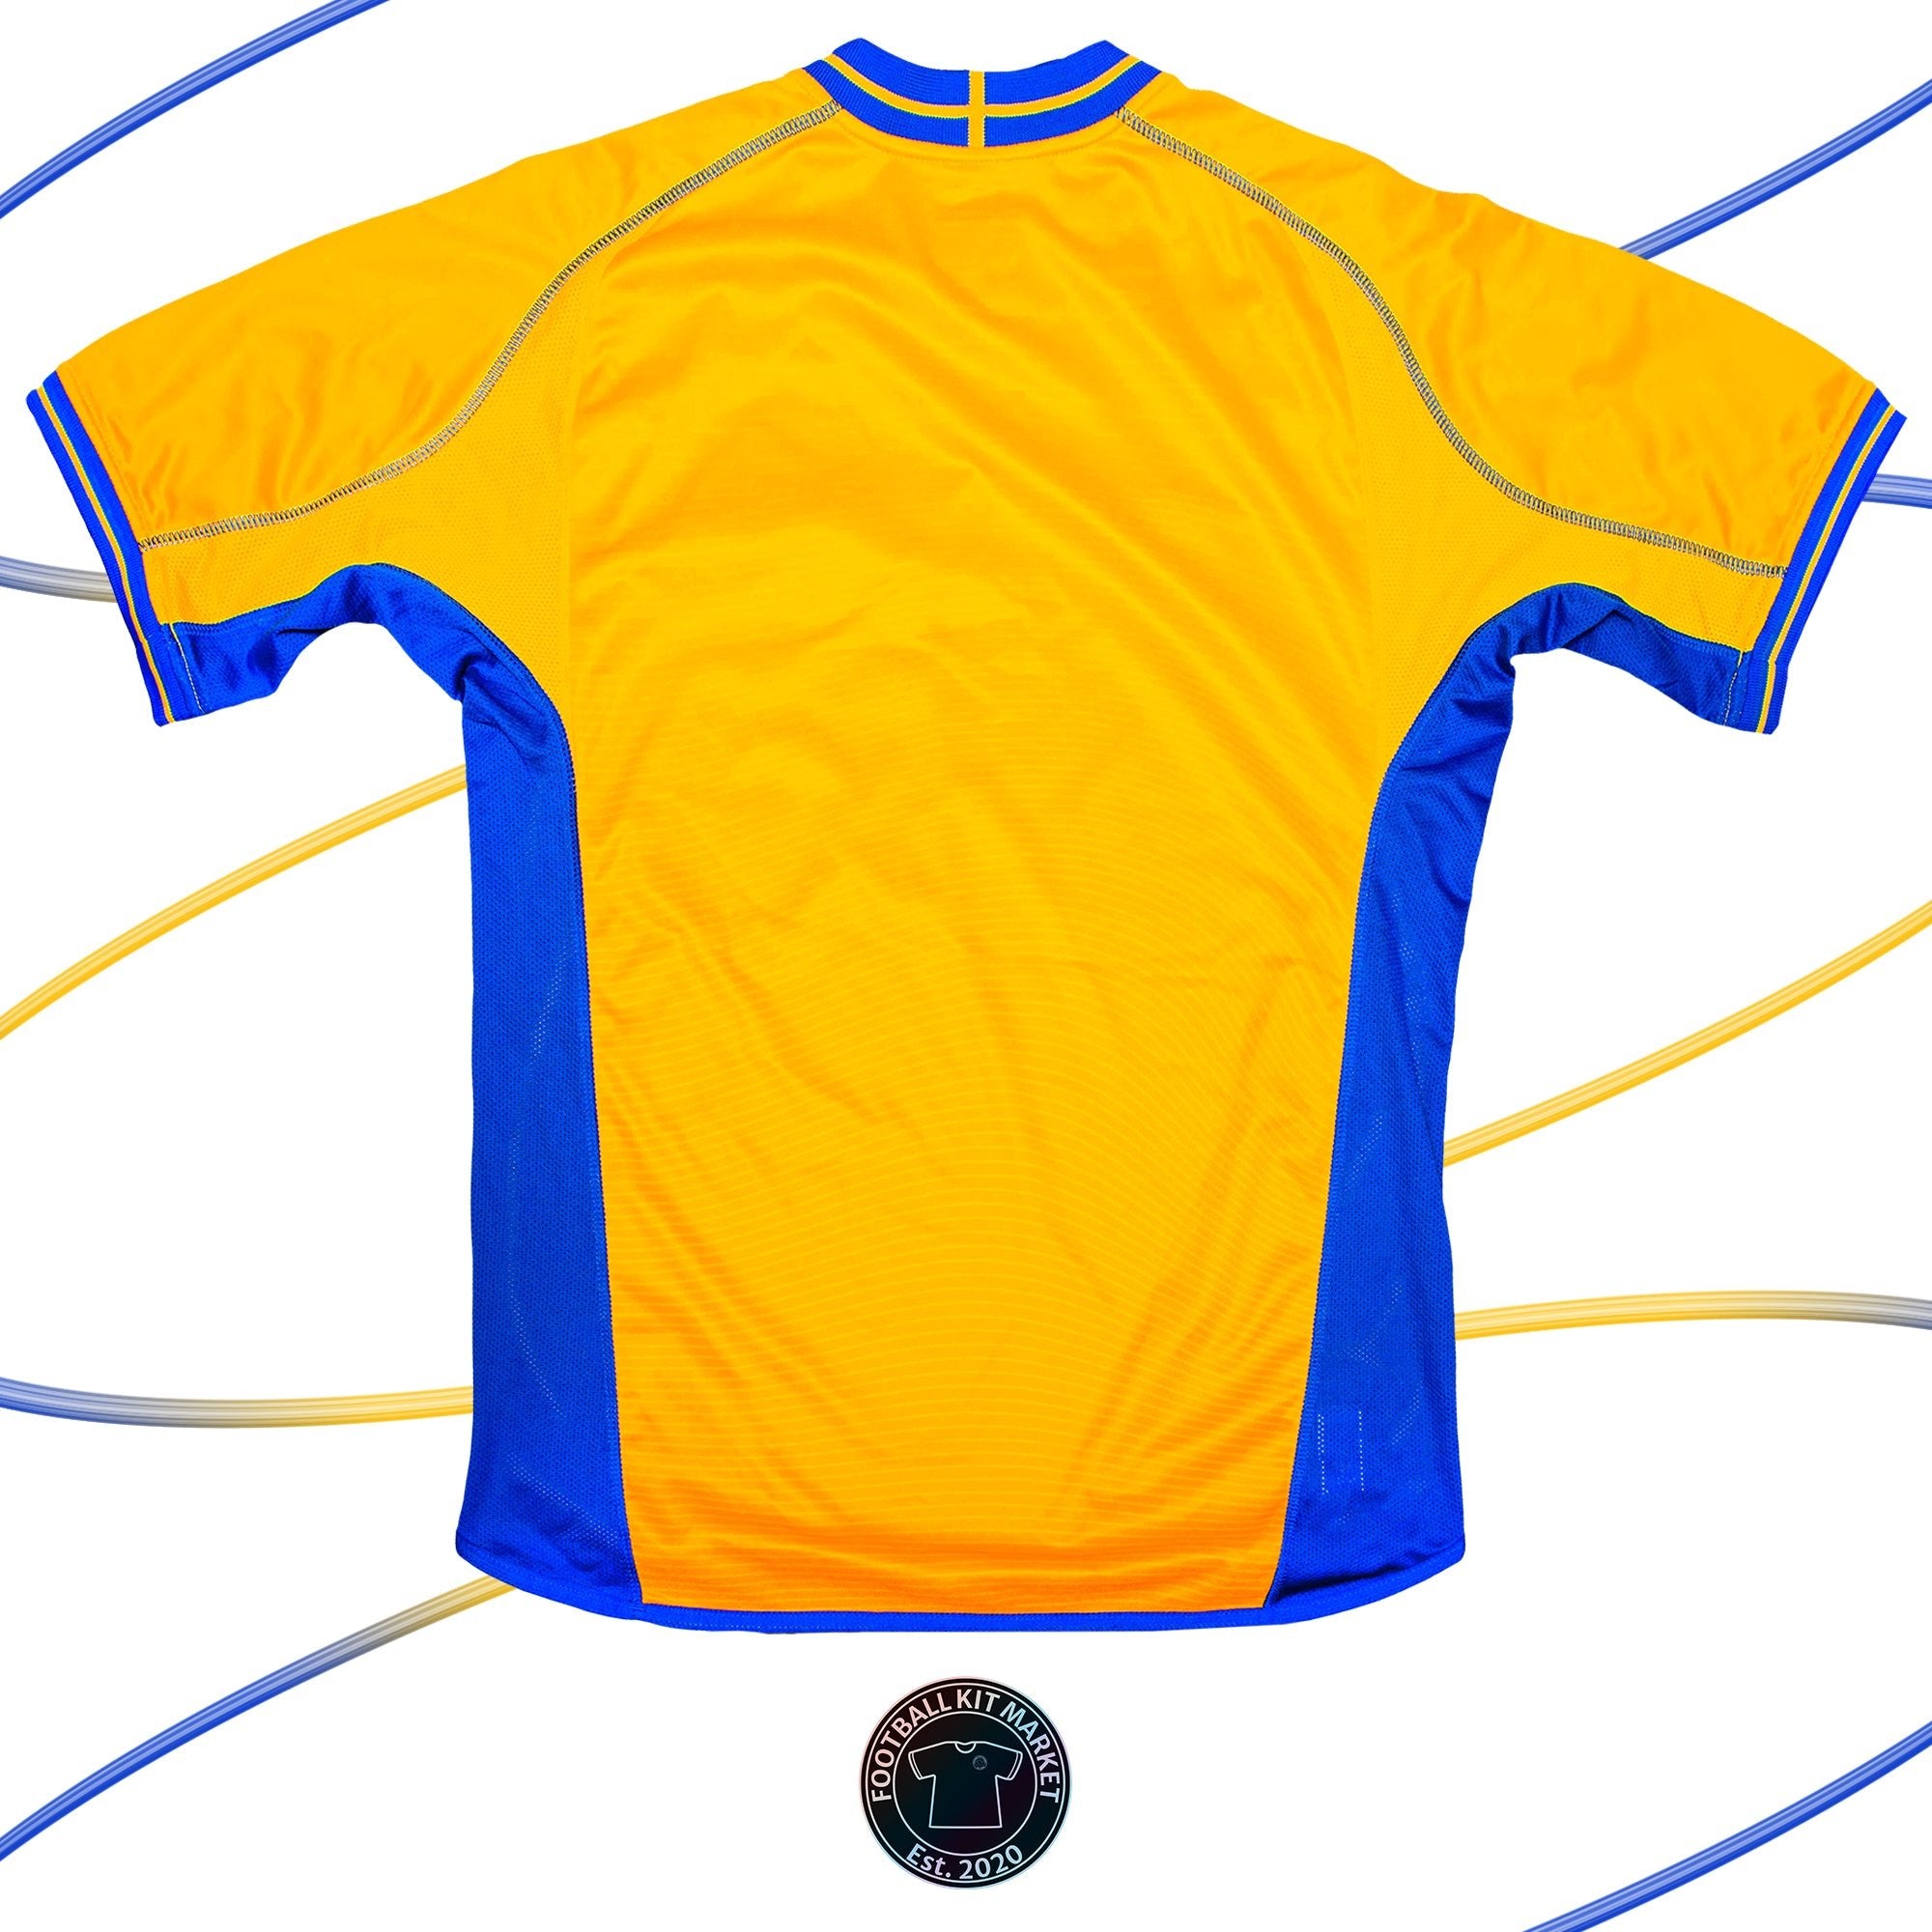 Genuine SWEDEN Home (2003-2005) - UMBRO (M) - Product Image from Football Kit Market